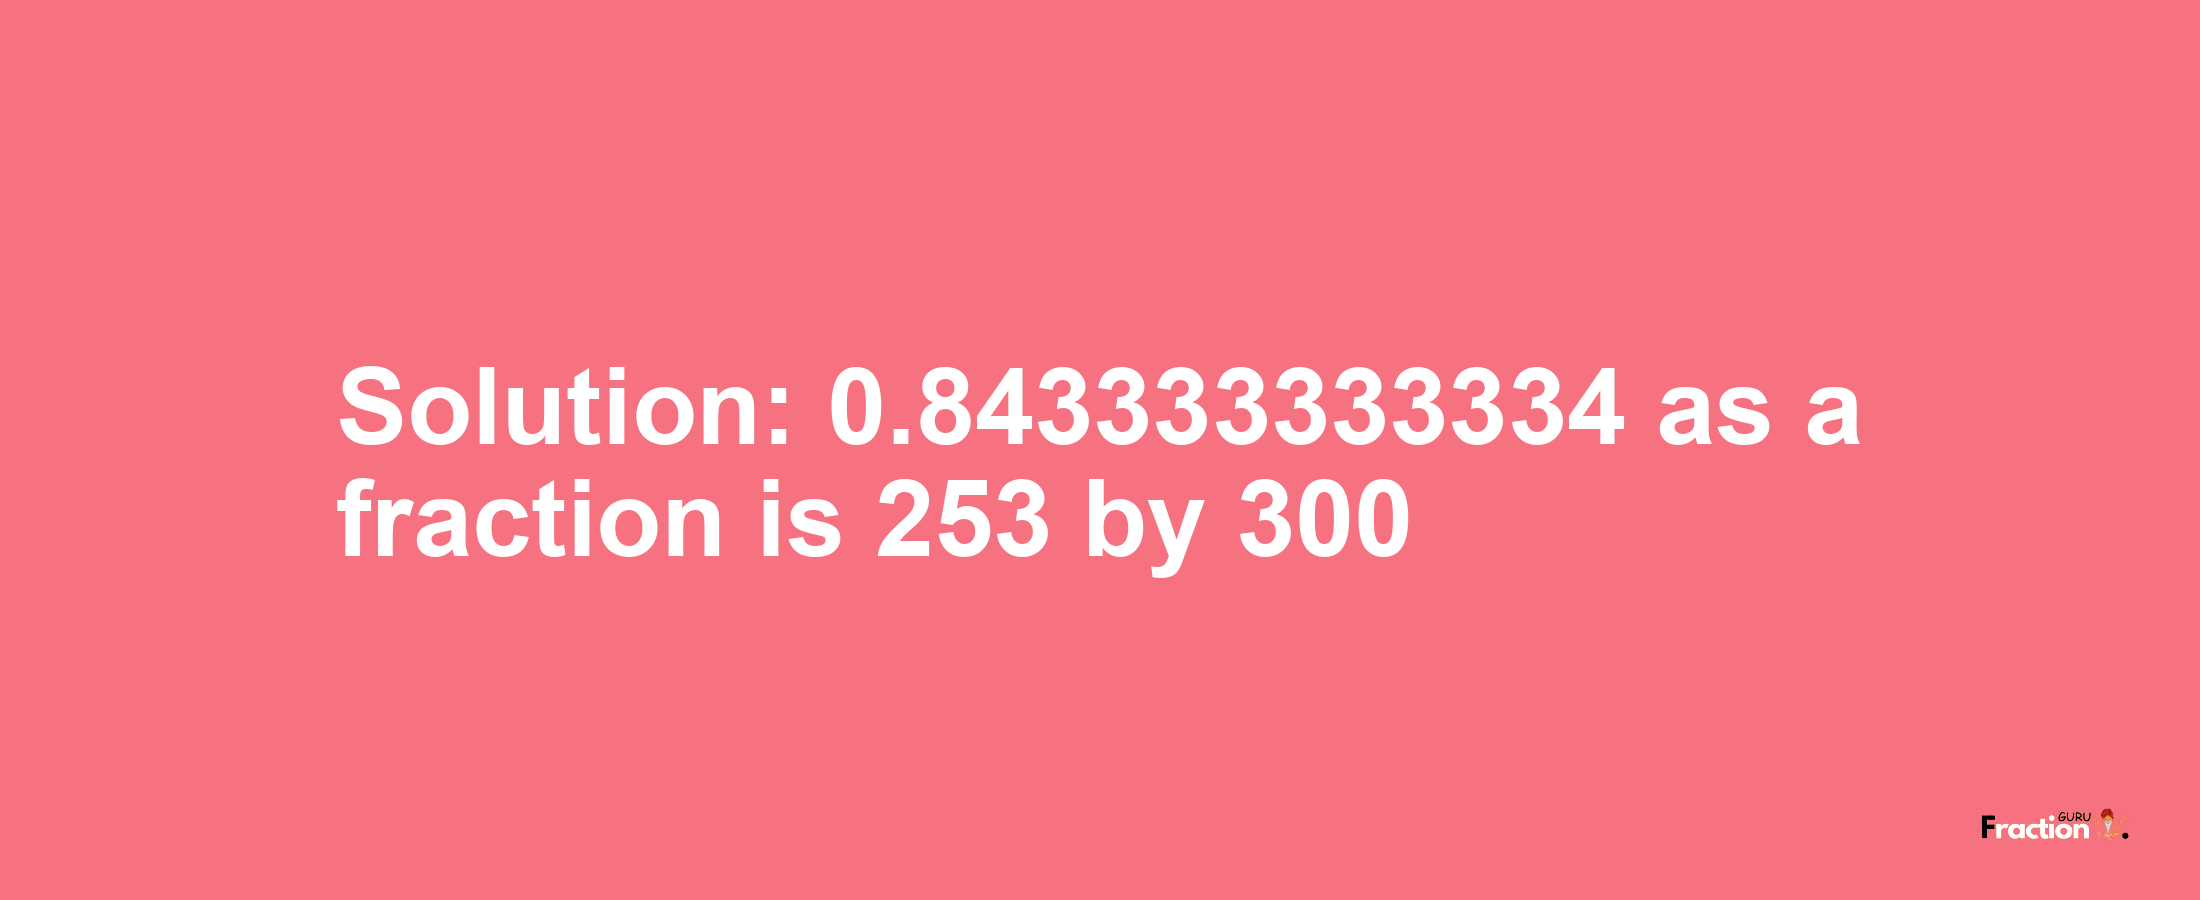 Solution:0.843333333334 as a fraction is 253/300